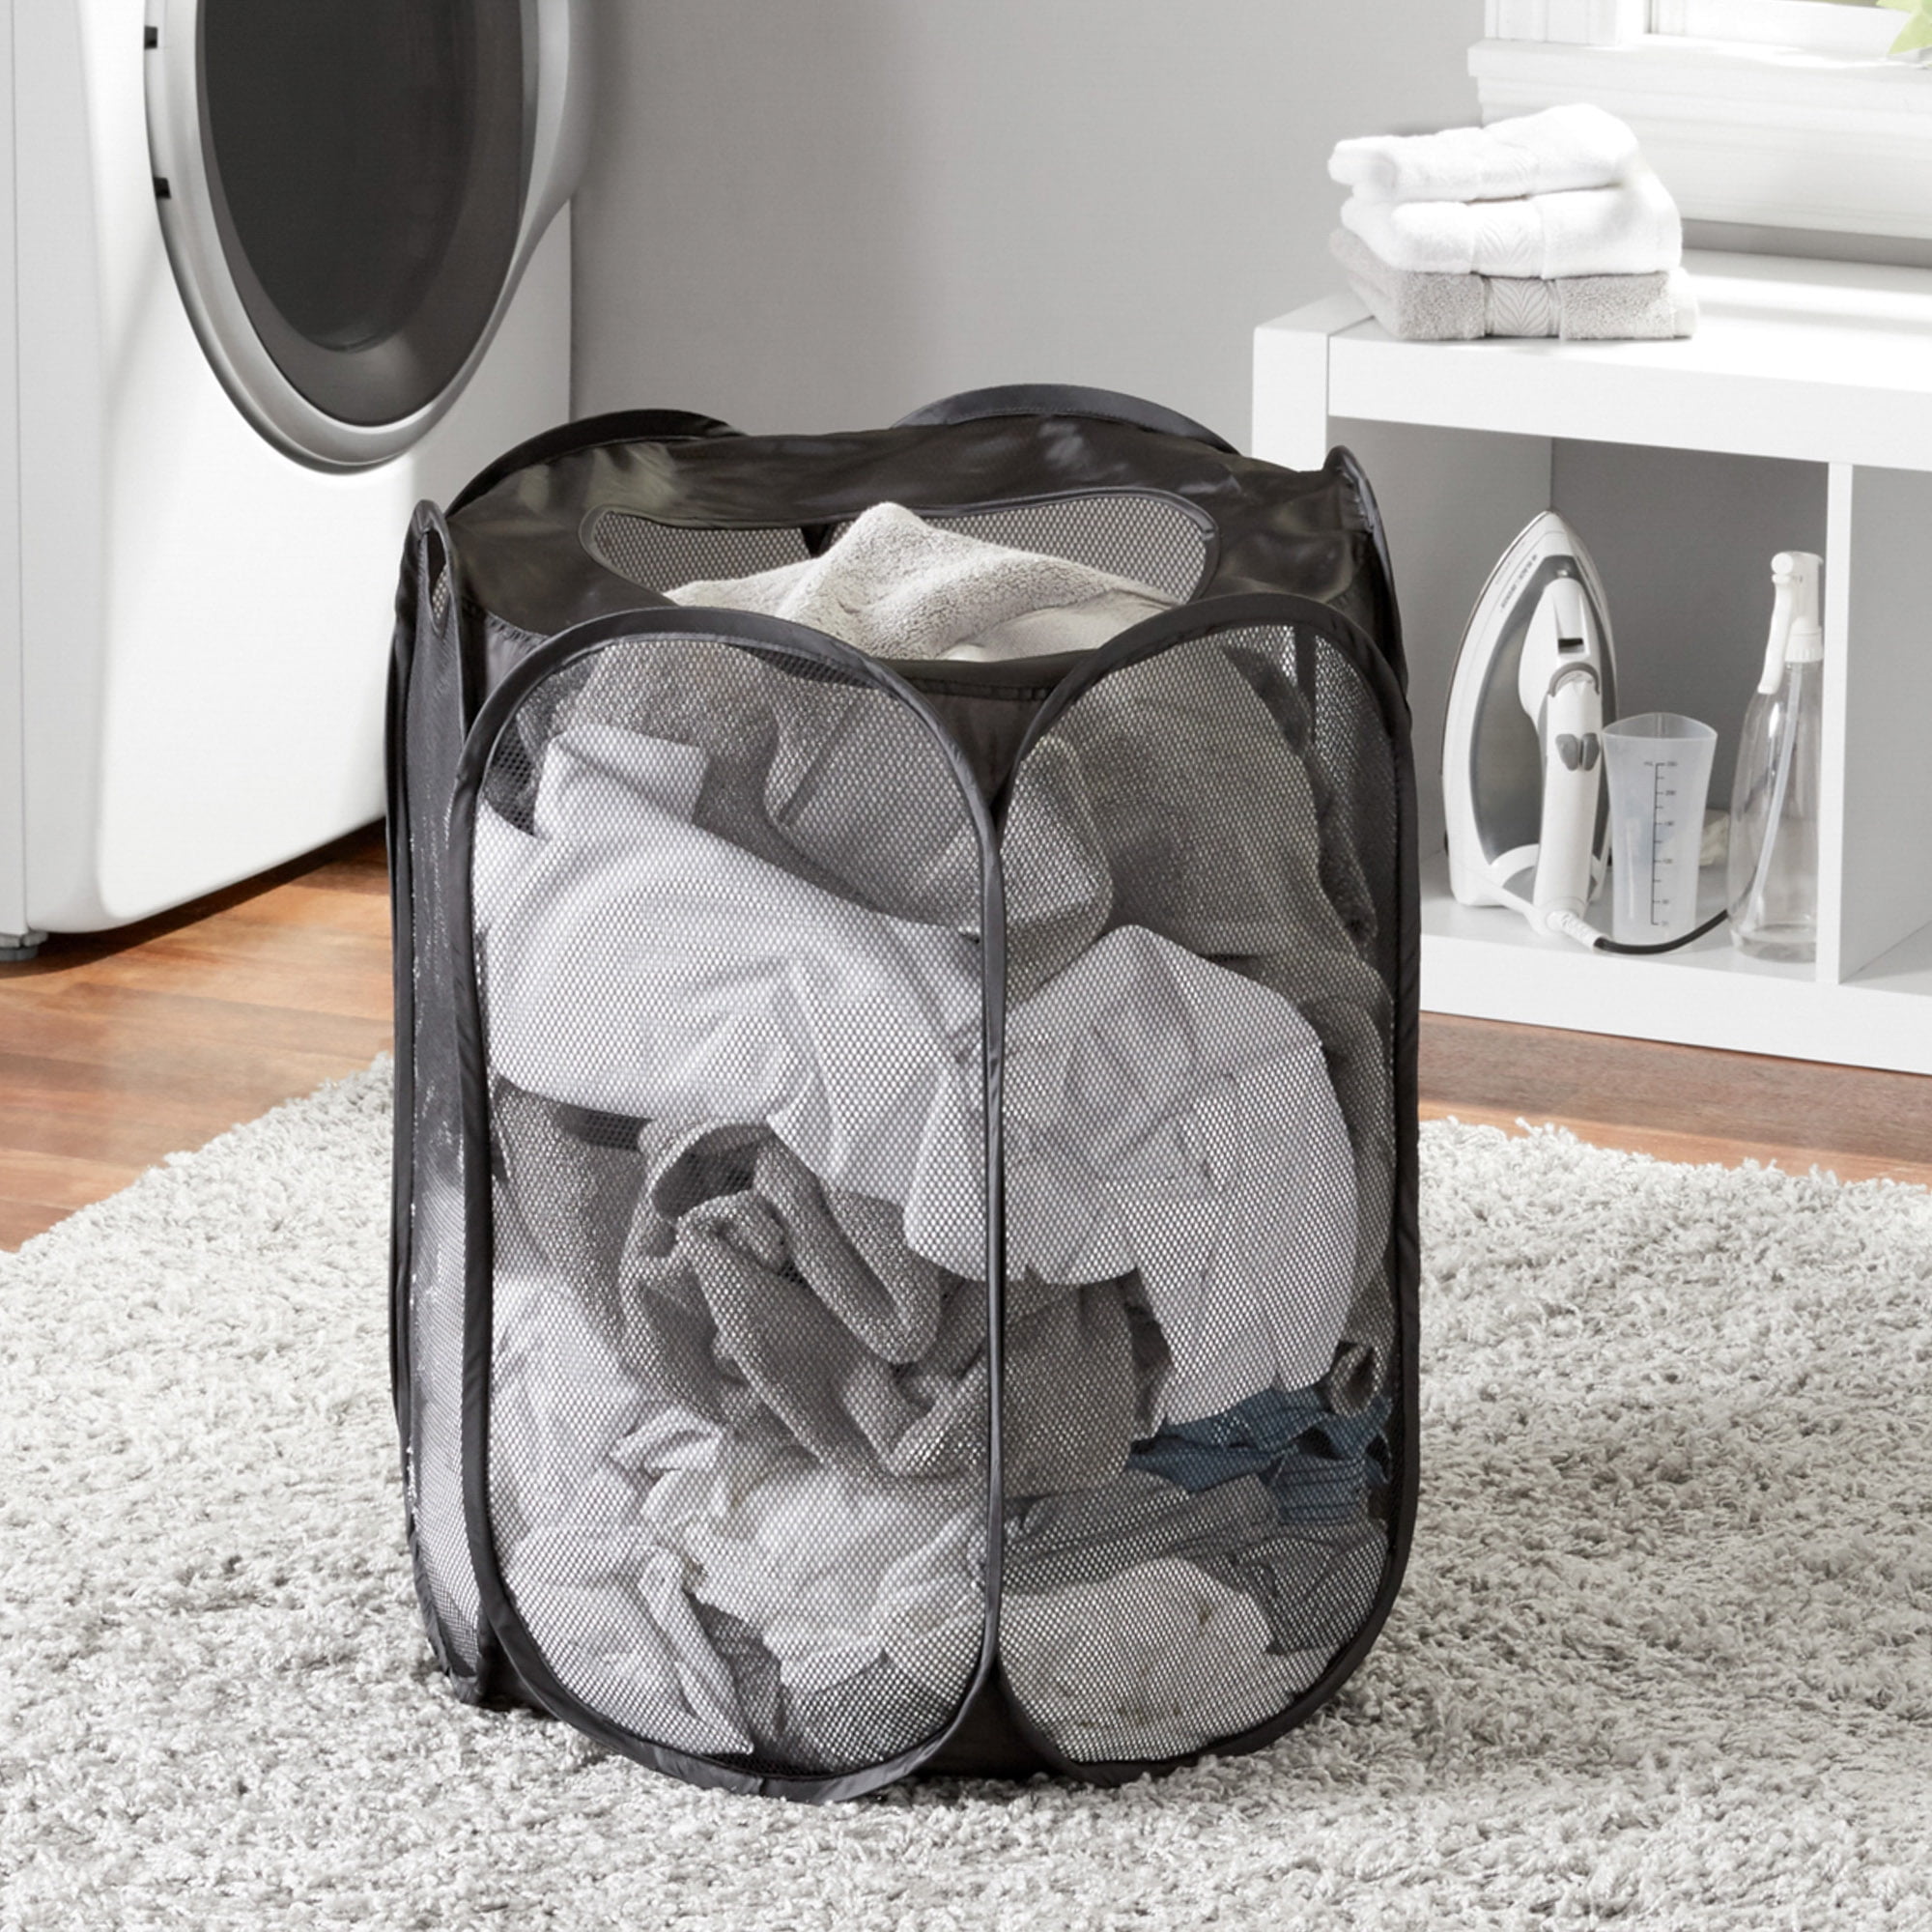 Details about   Pop Up Laundry Hamper 2 Pack Foldable Mesh Pop-up Laundry Hamper with Reinfor... 